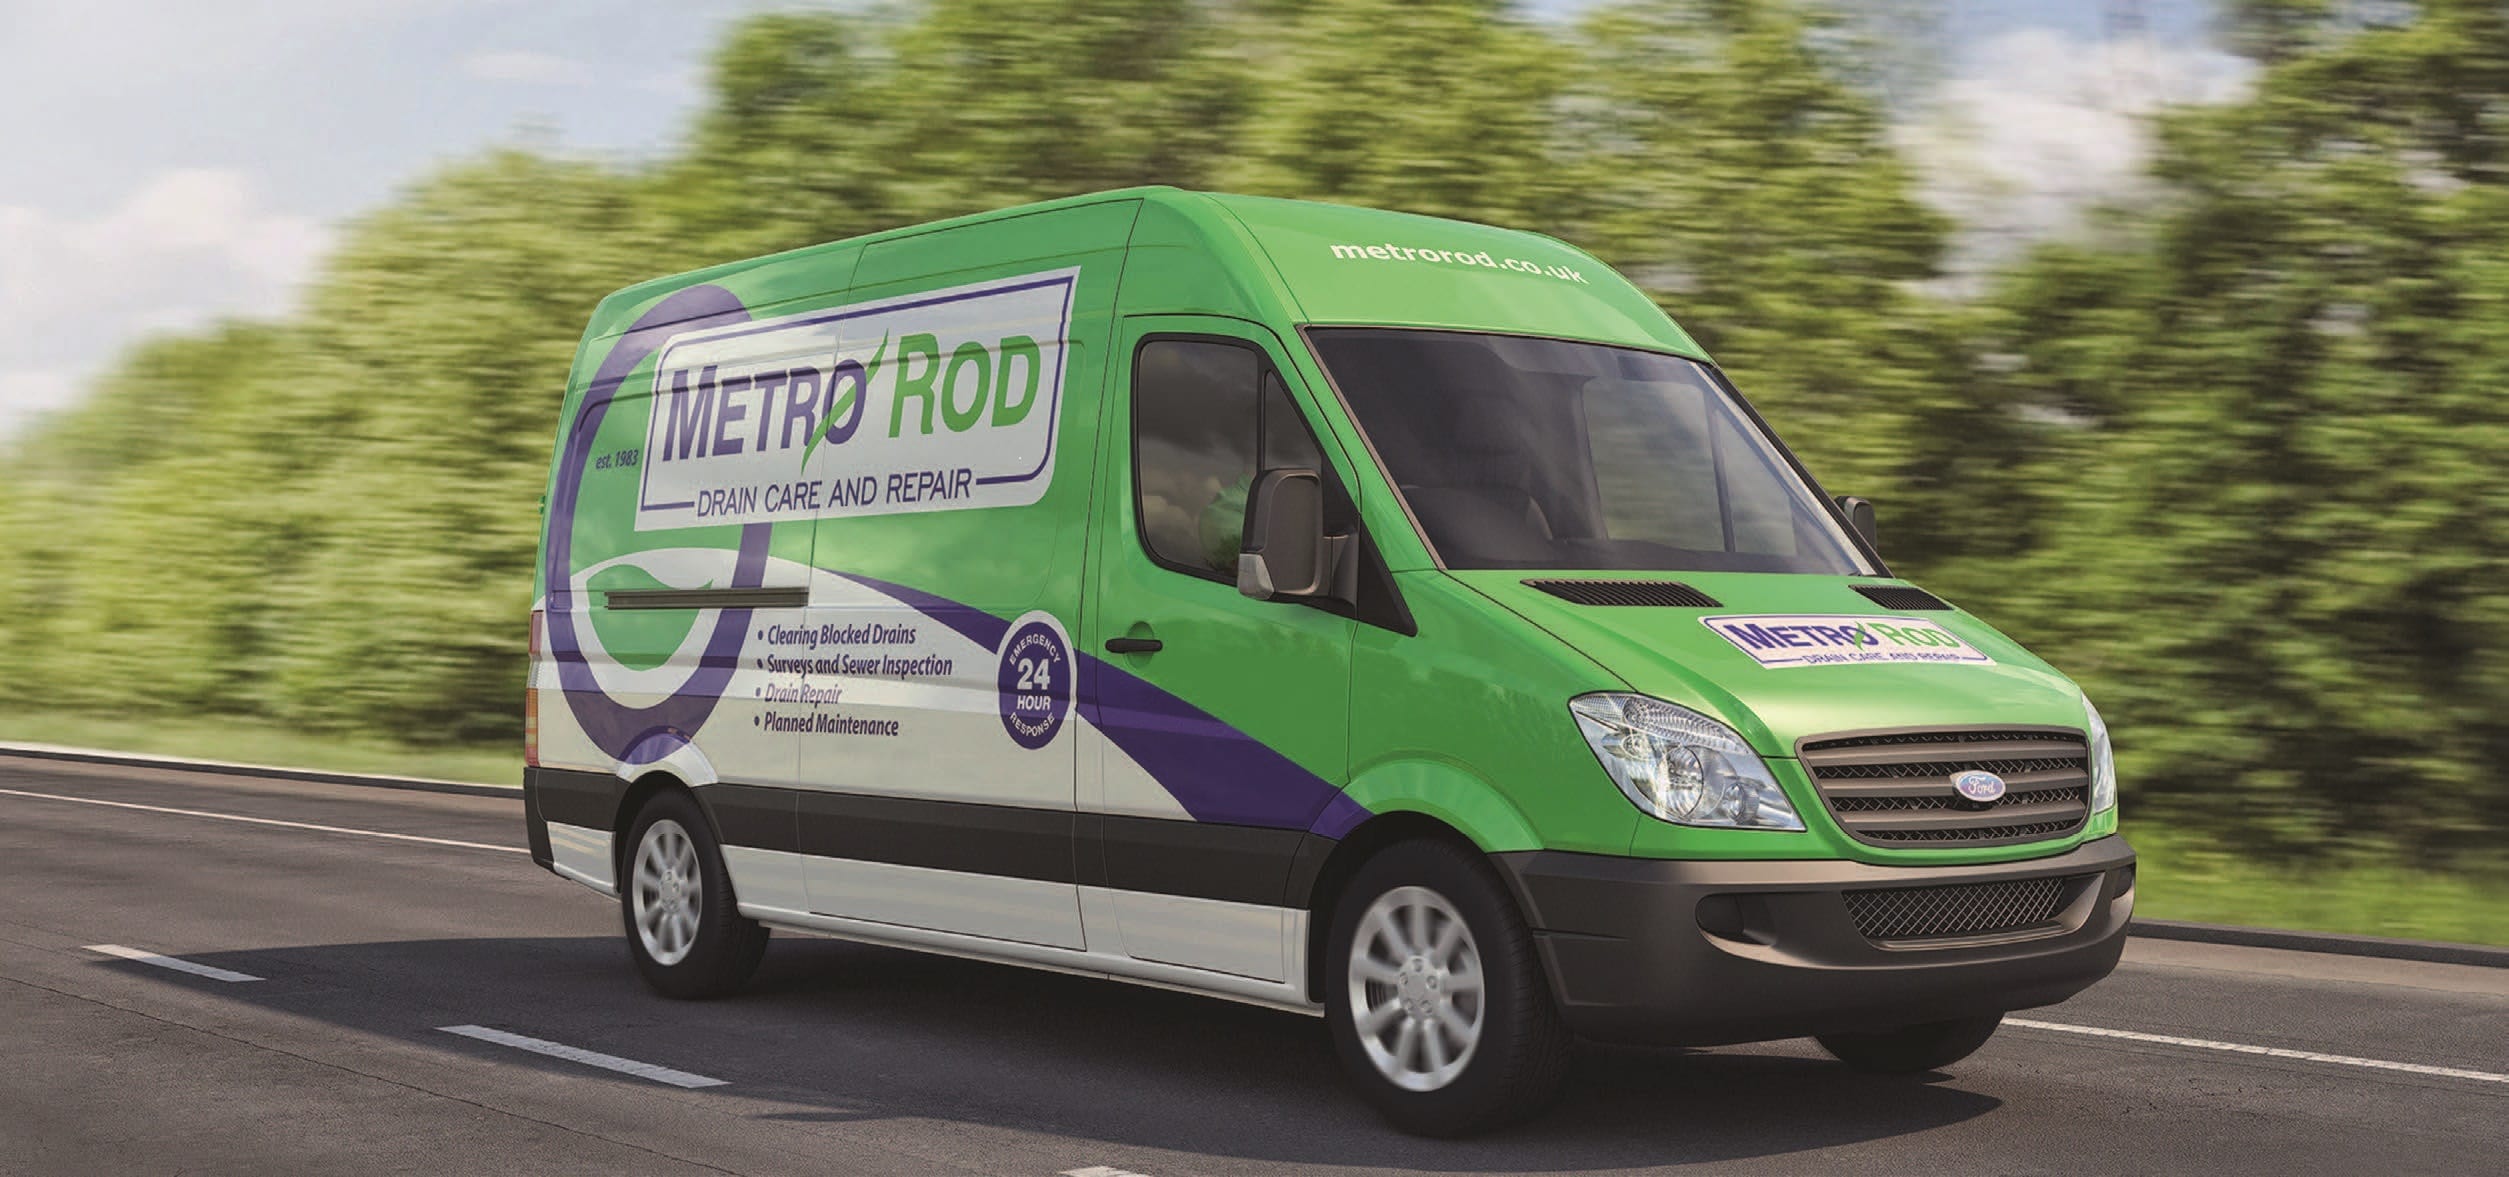 Metro Rod Services Explained